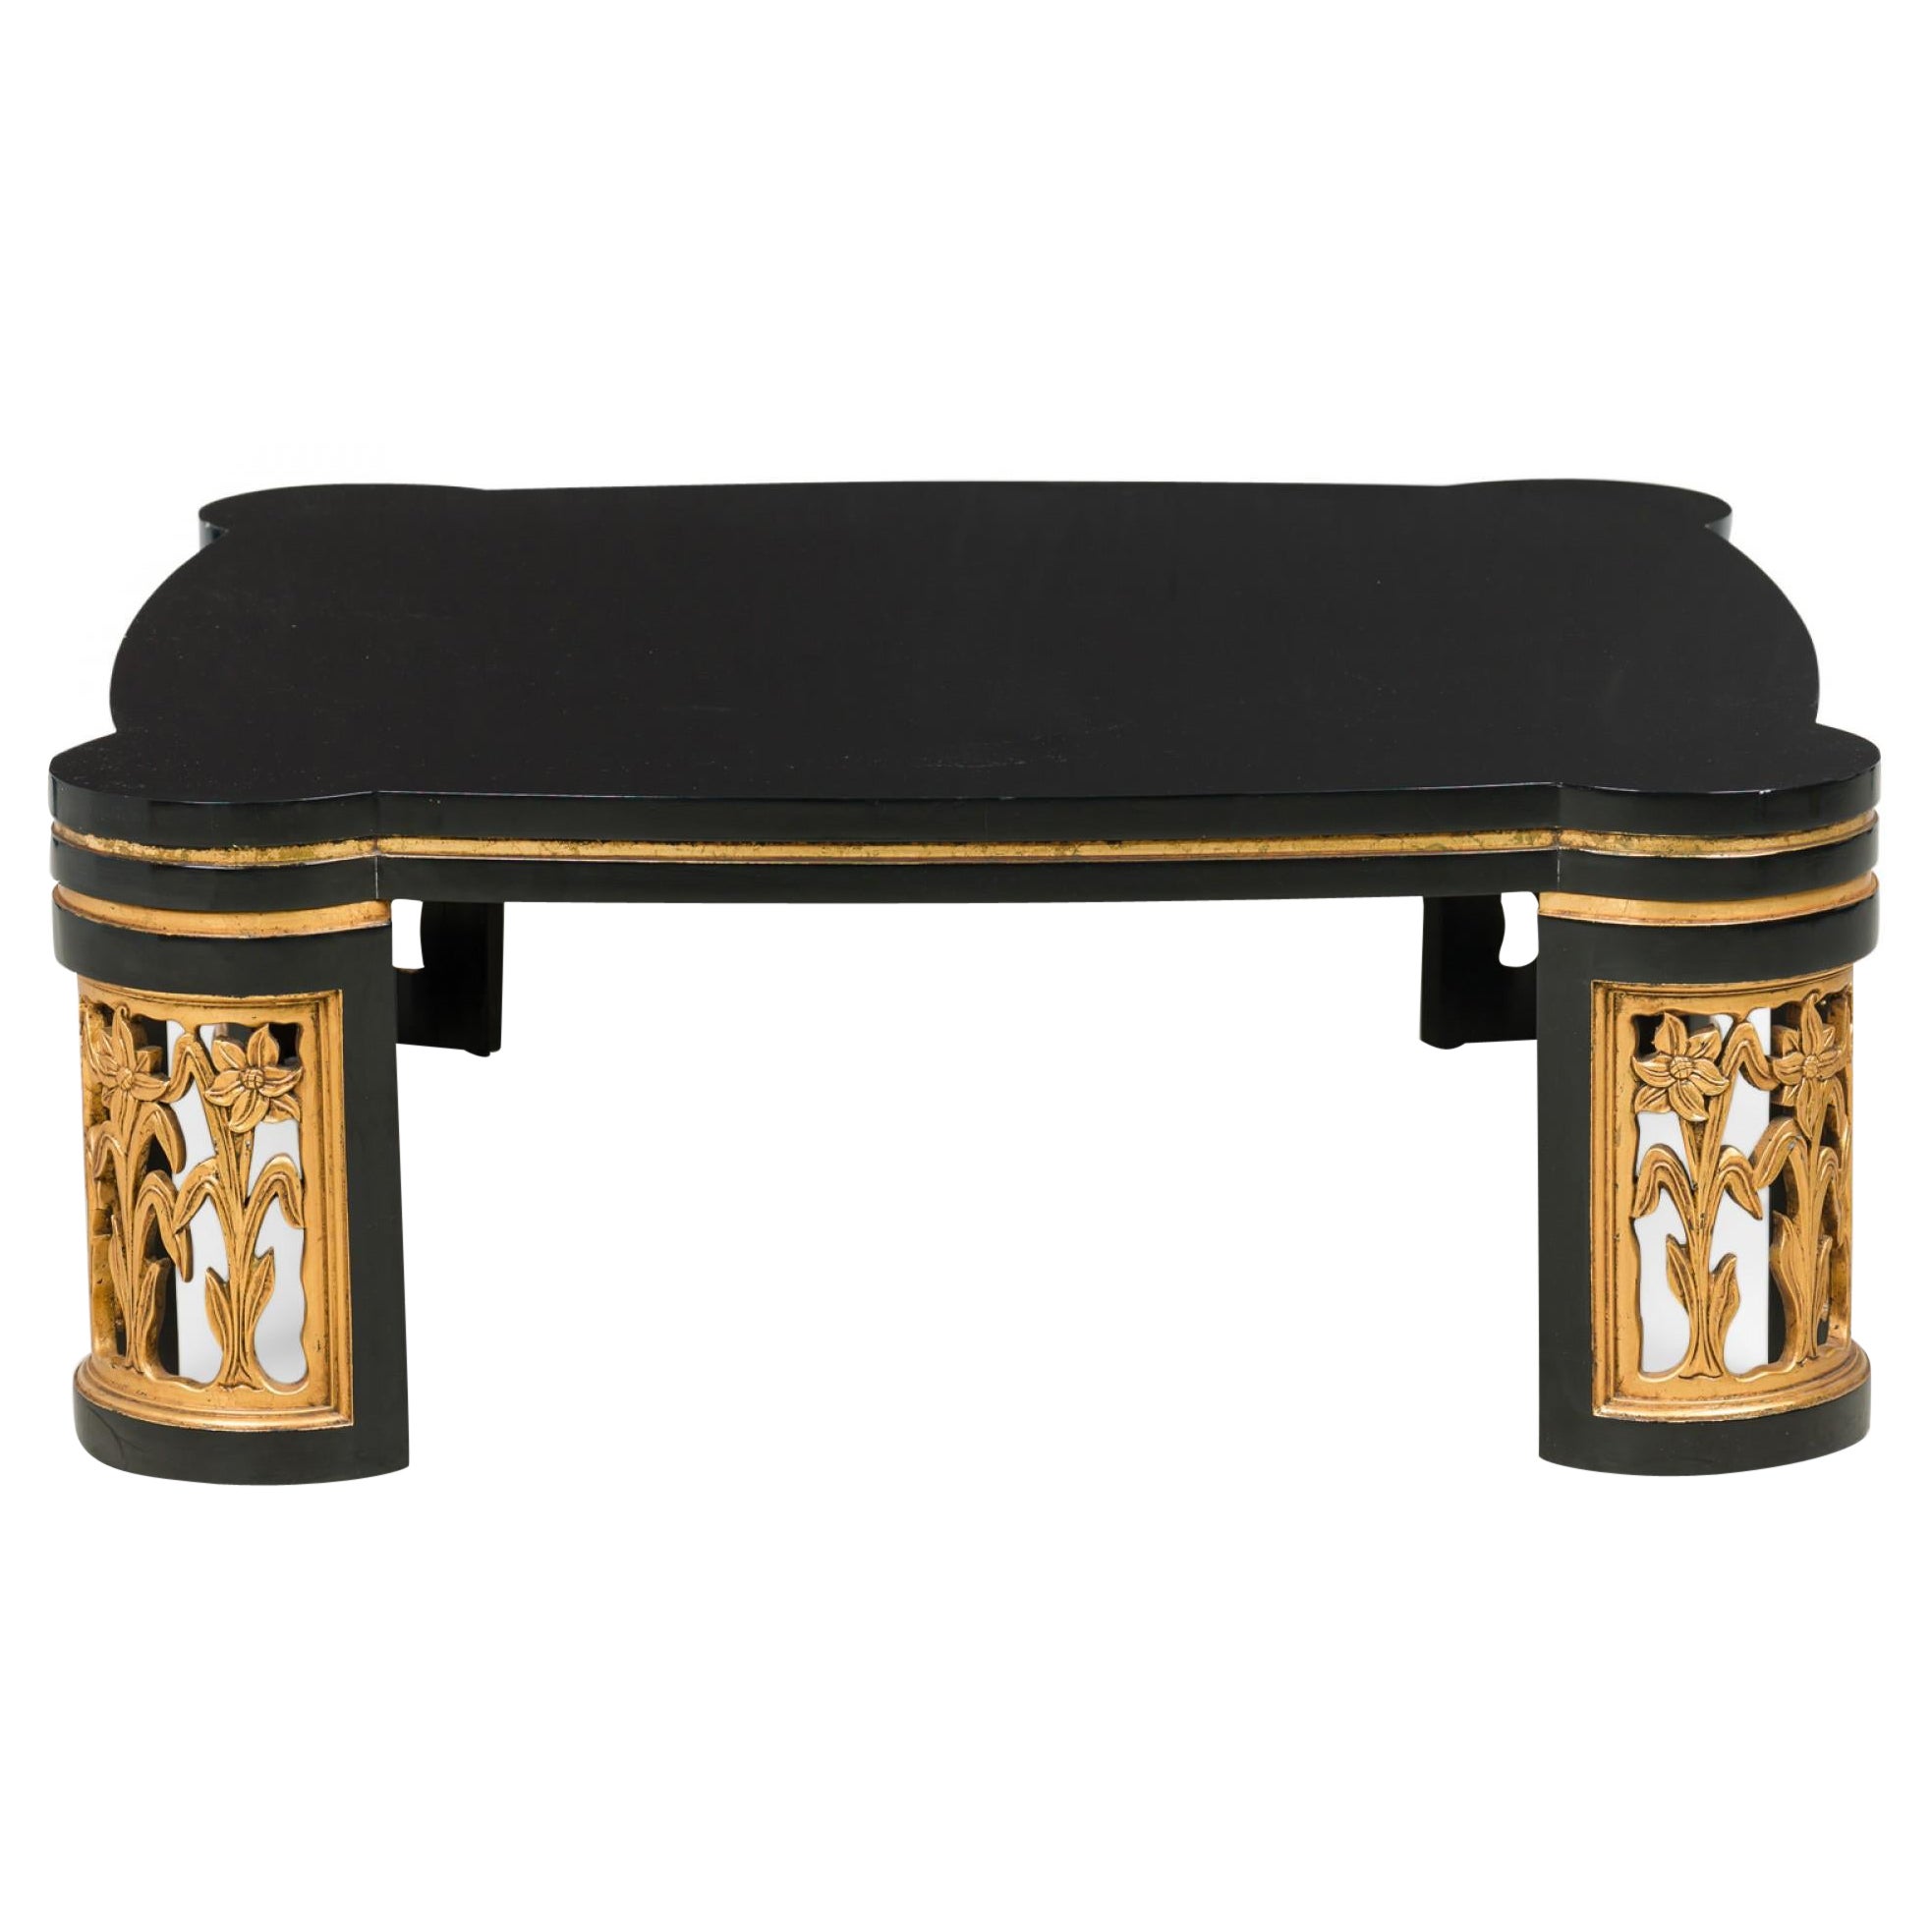 American Black Lacquer Floral Parcel Gilt Low / Coffee Table, Attributed to Jame